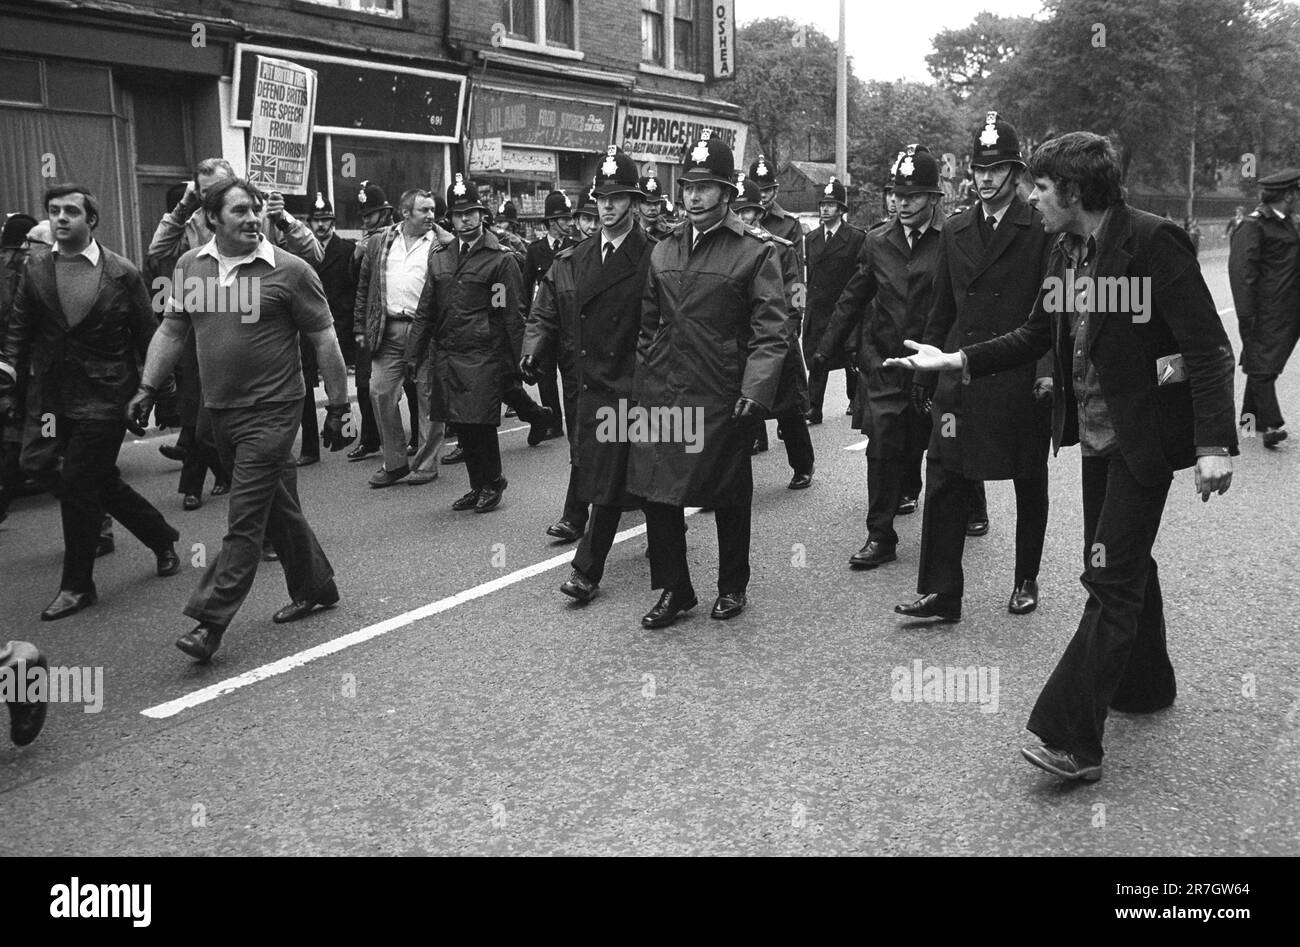 National Front march through a suburb of Manchester, a left wing demonstrator harangues the NF who are protected by the police. Manchester, England Oct 8th 1977. 1970s UK HOMER SYKES Stock Photo